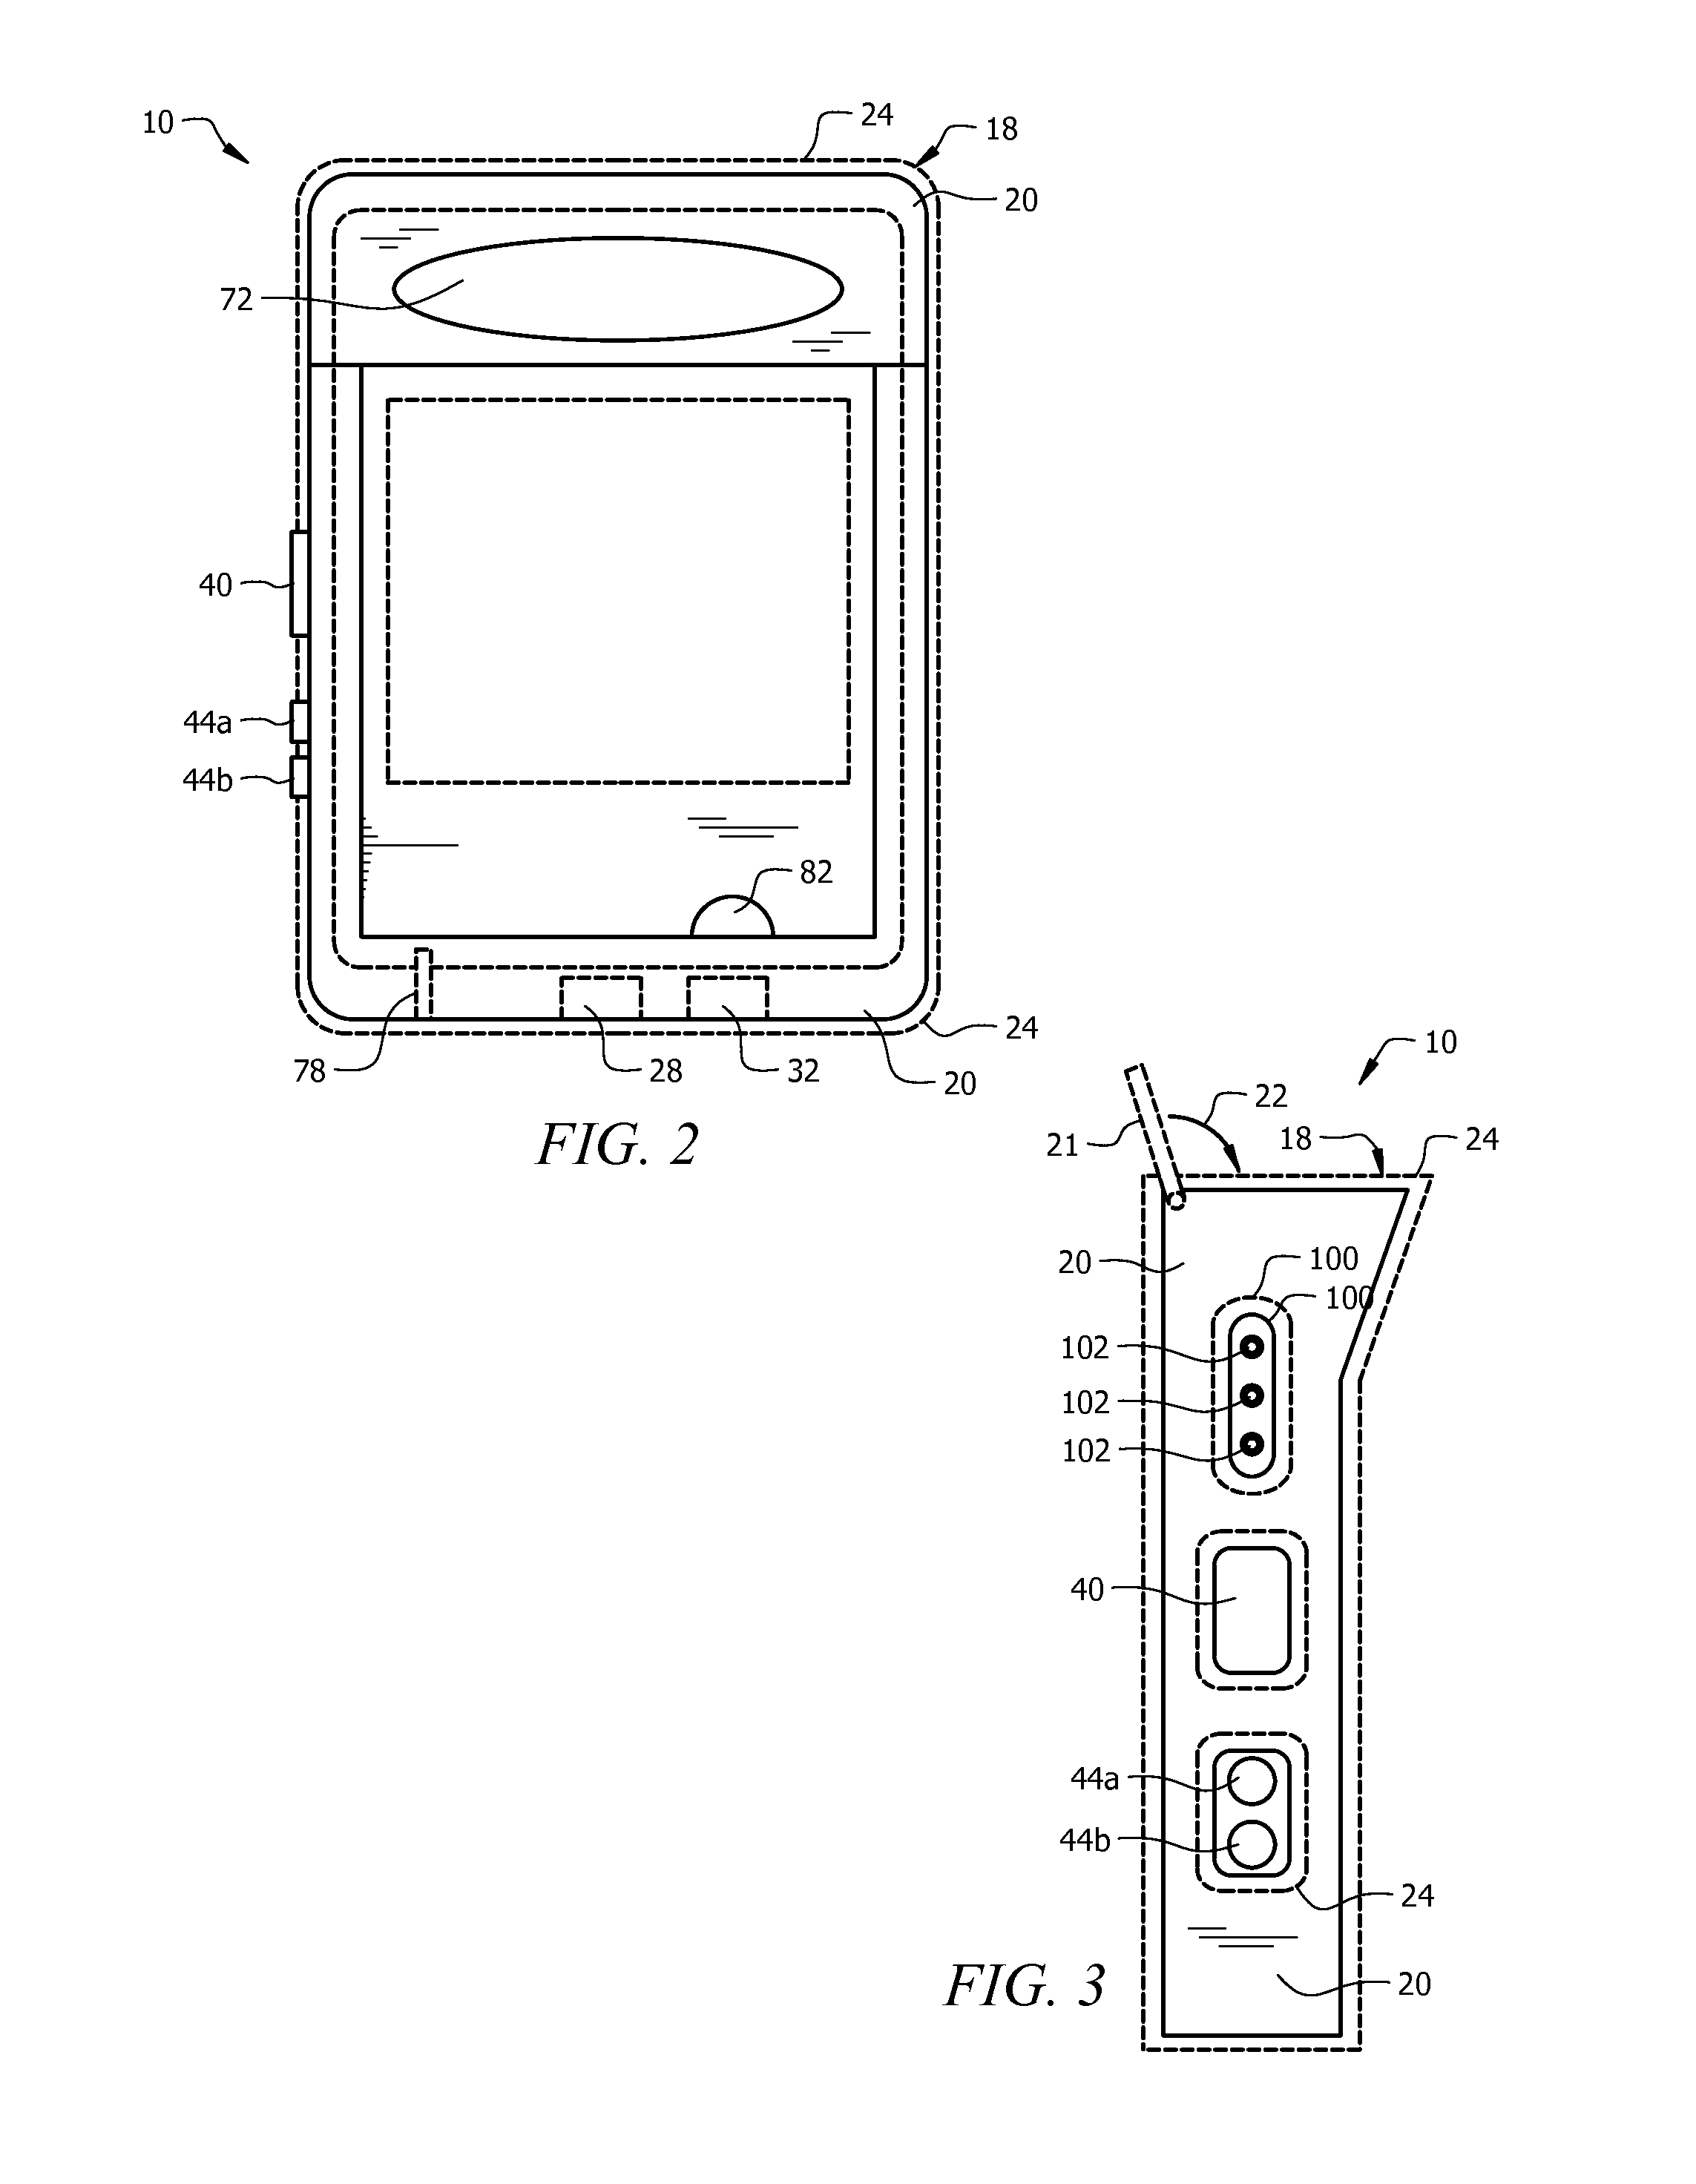 Adapters for facilitating half-duplex wireless communications in portable electronic communications devices, and systems comprising same